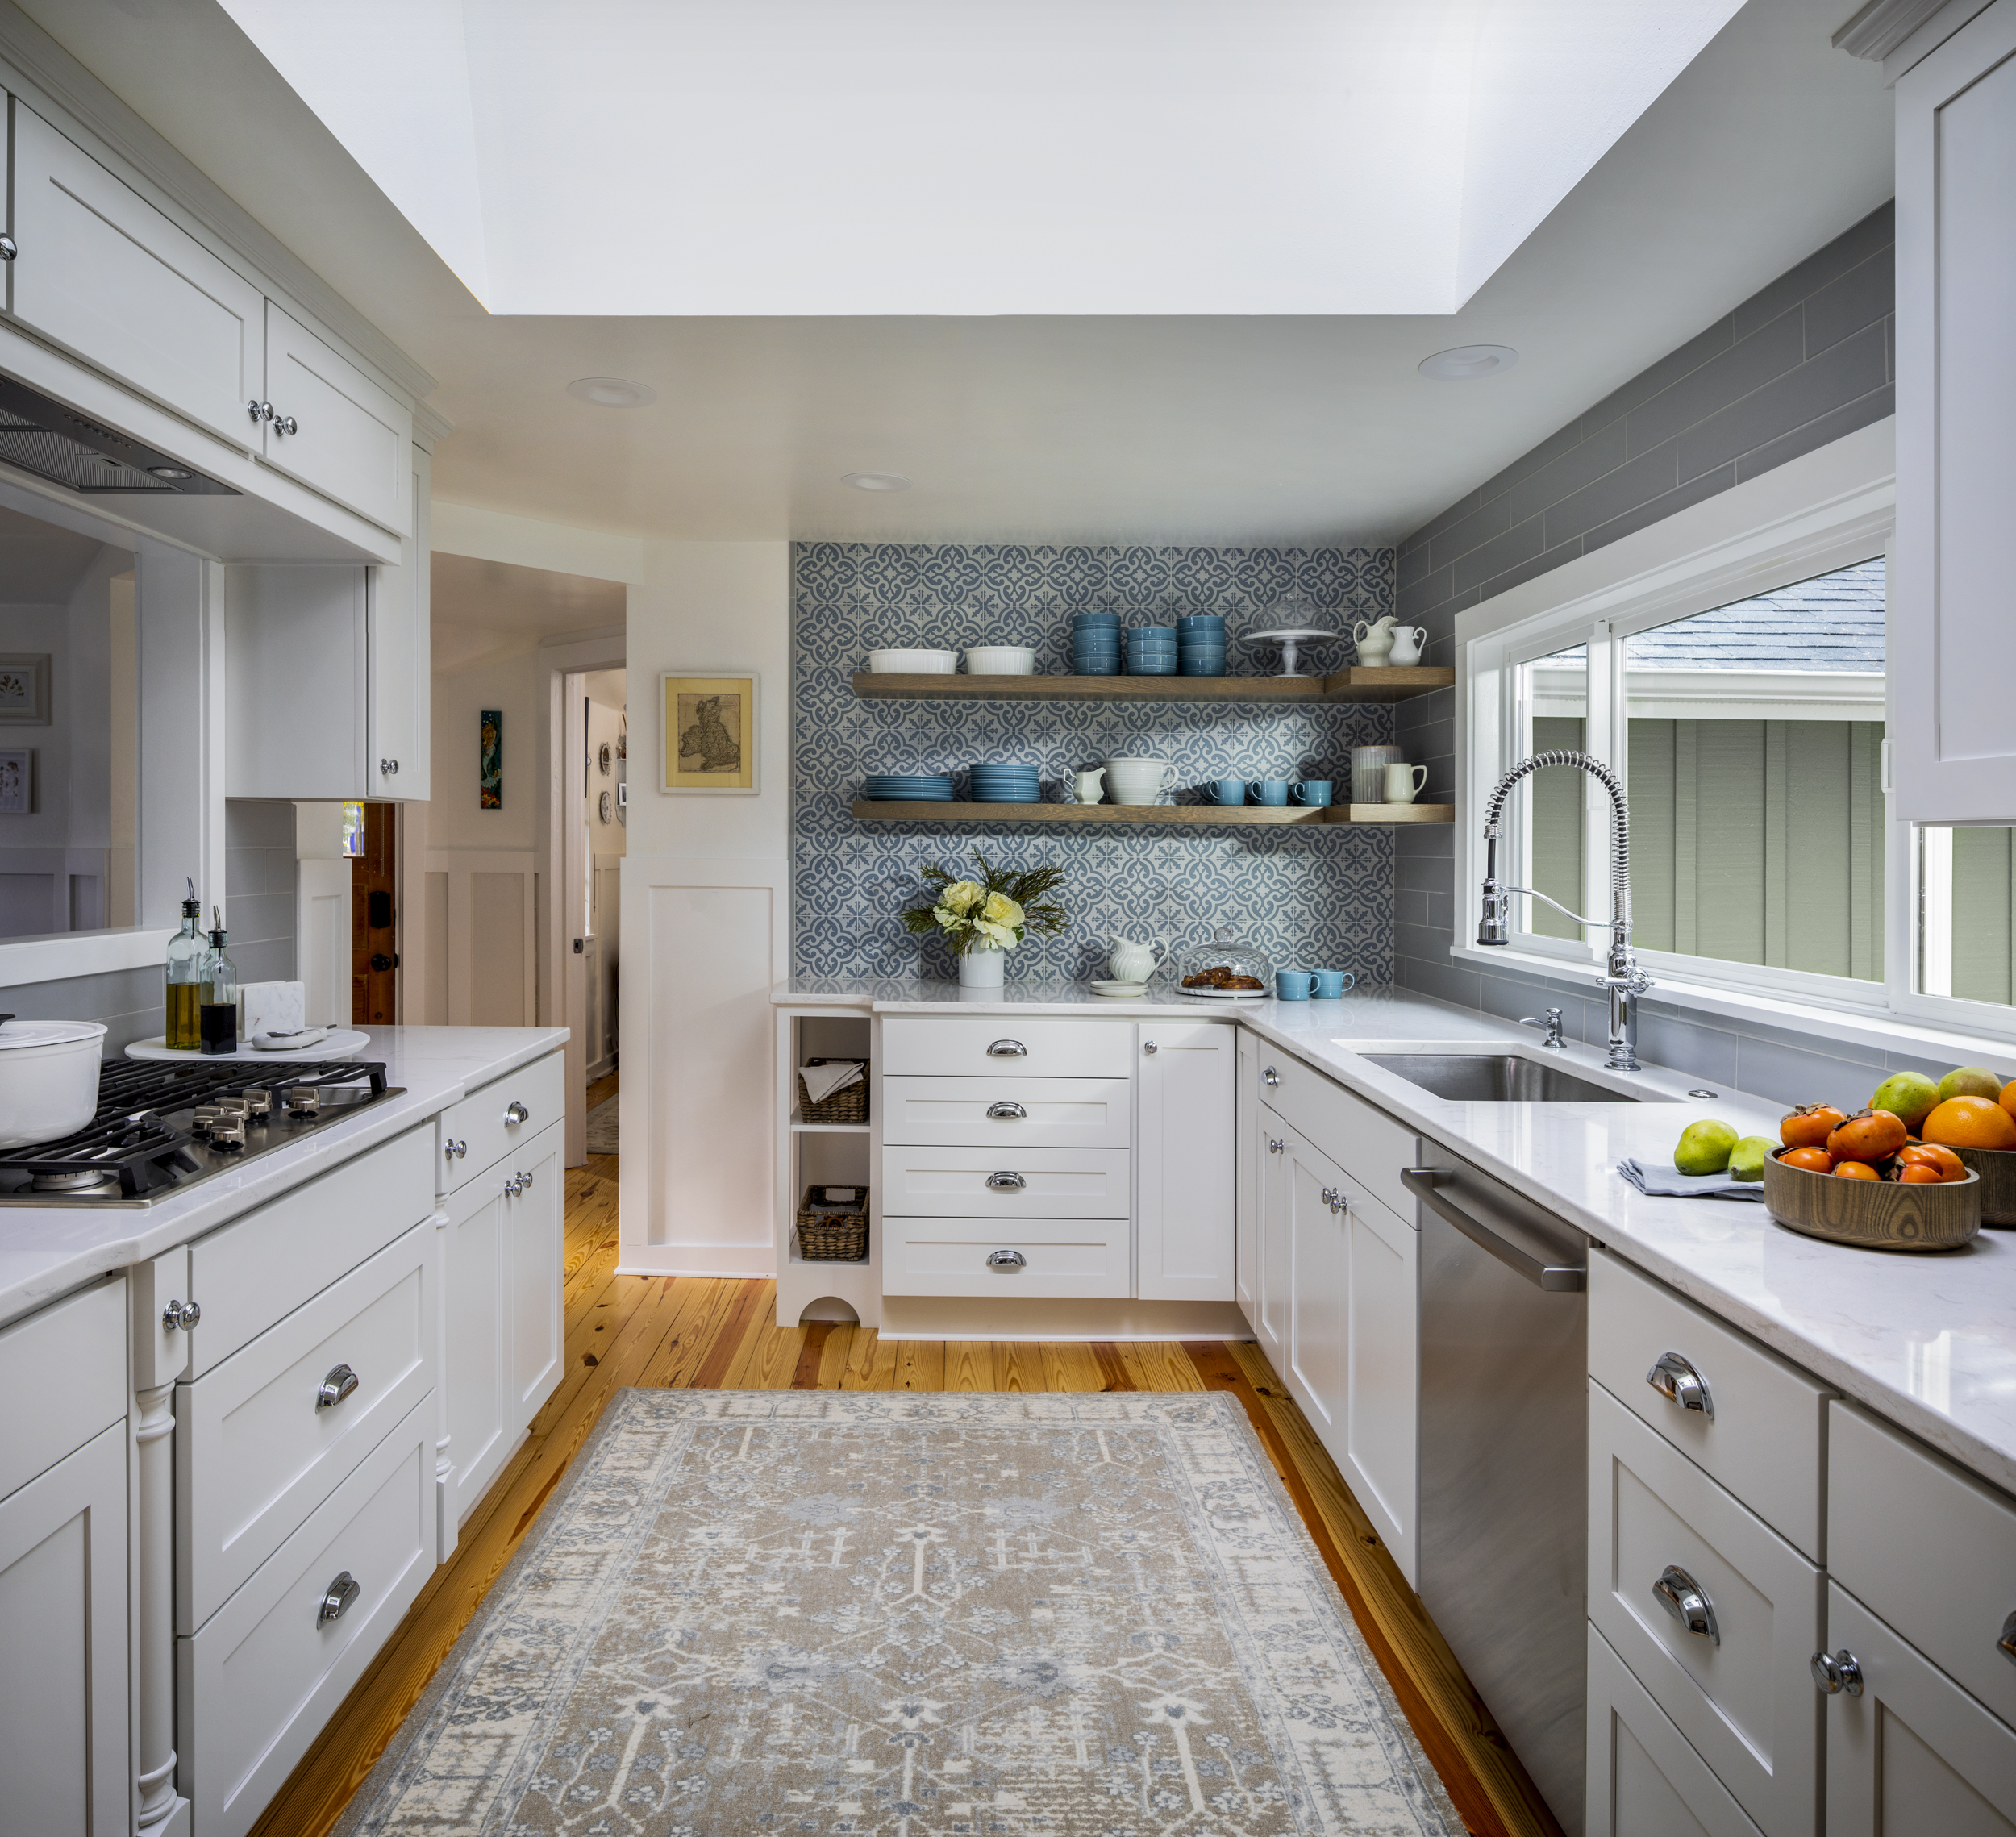 What Does Kitchen Remodeling Cost?